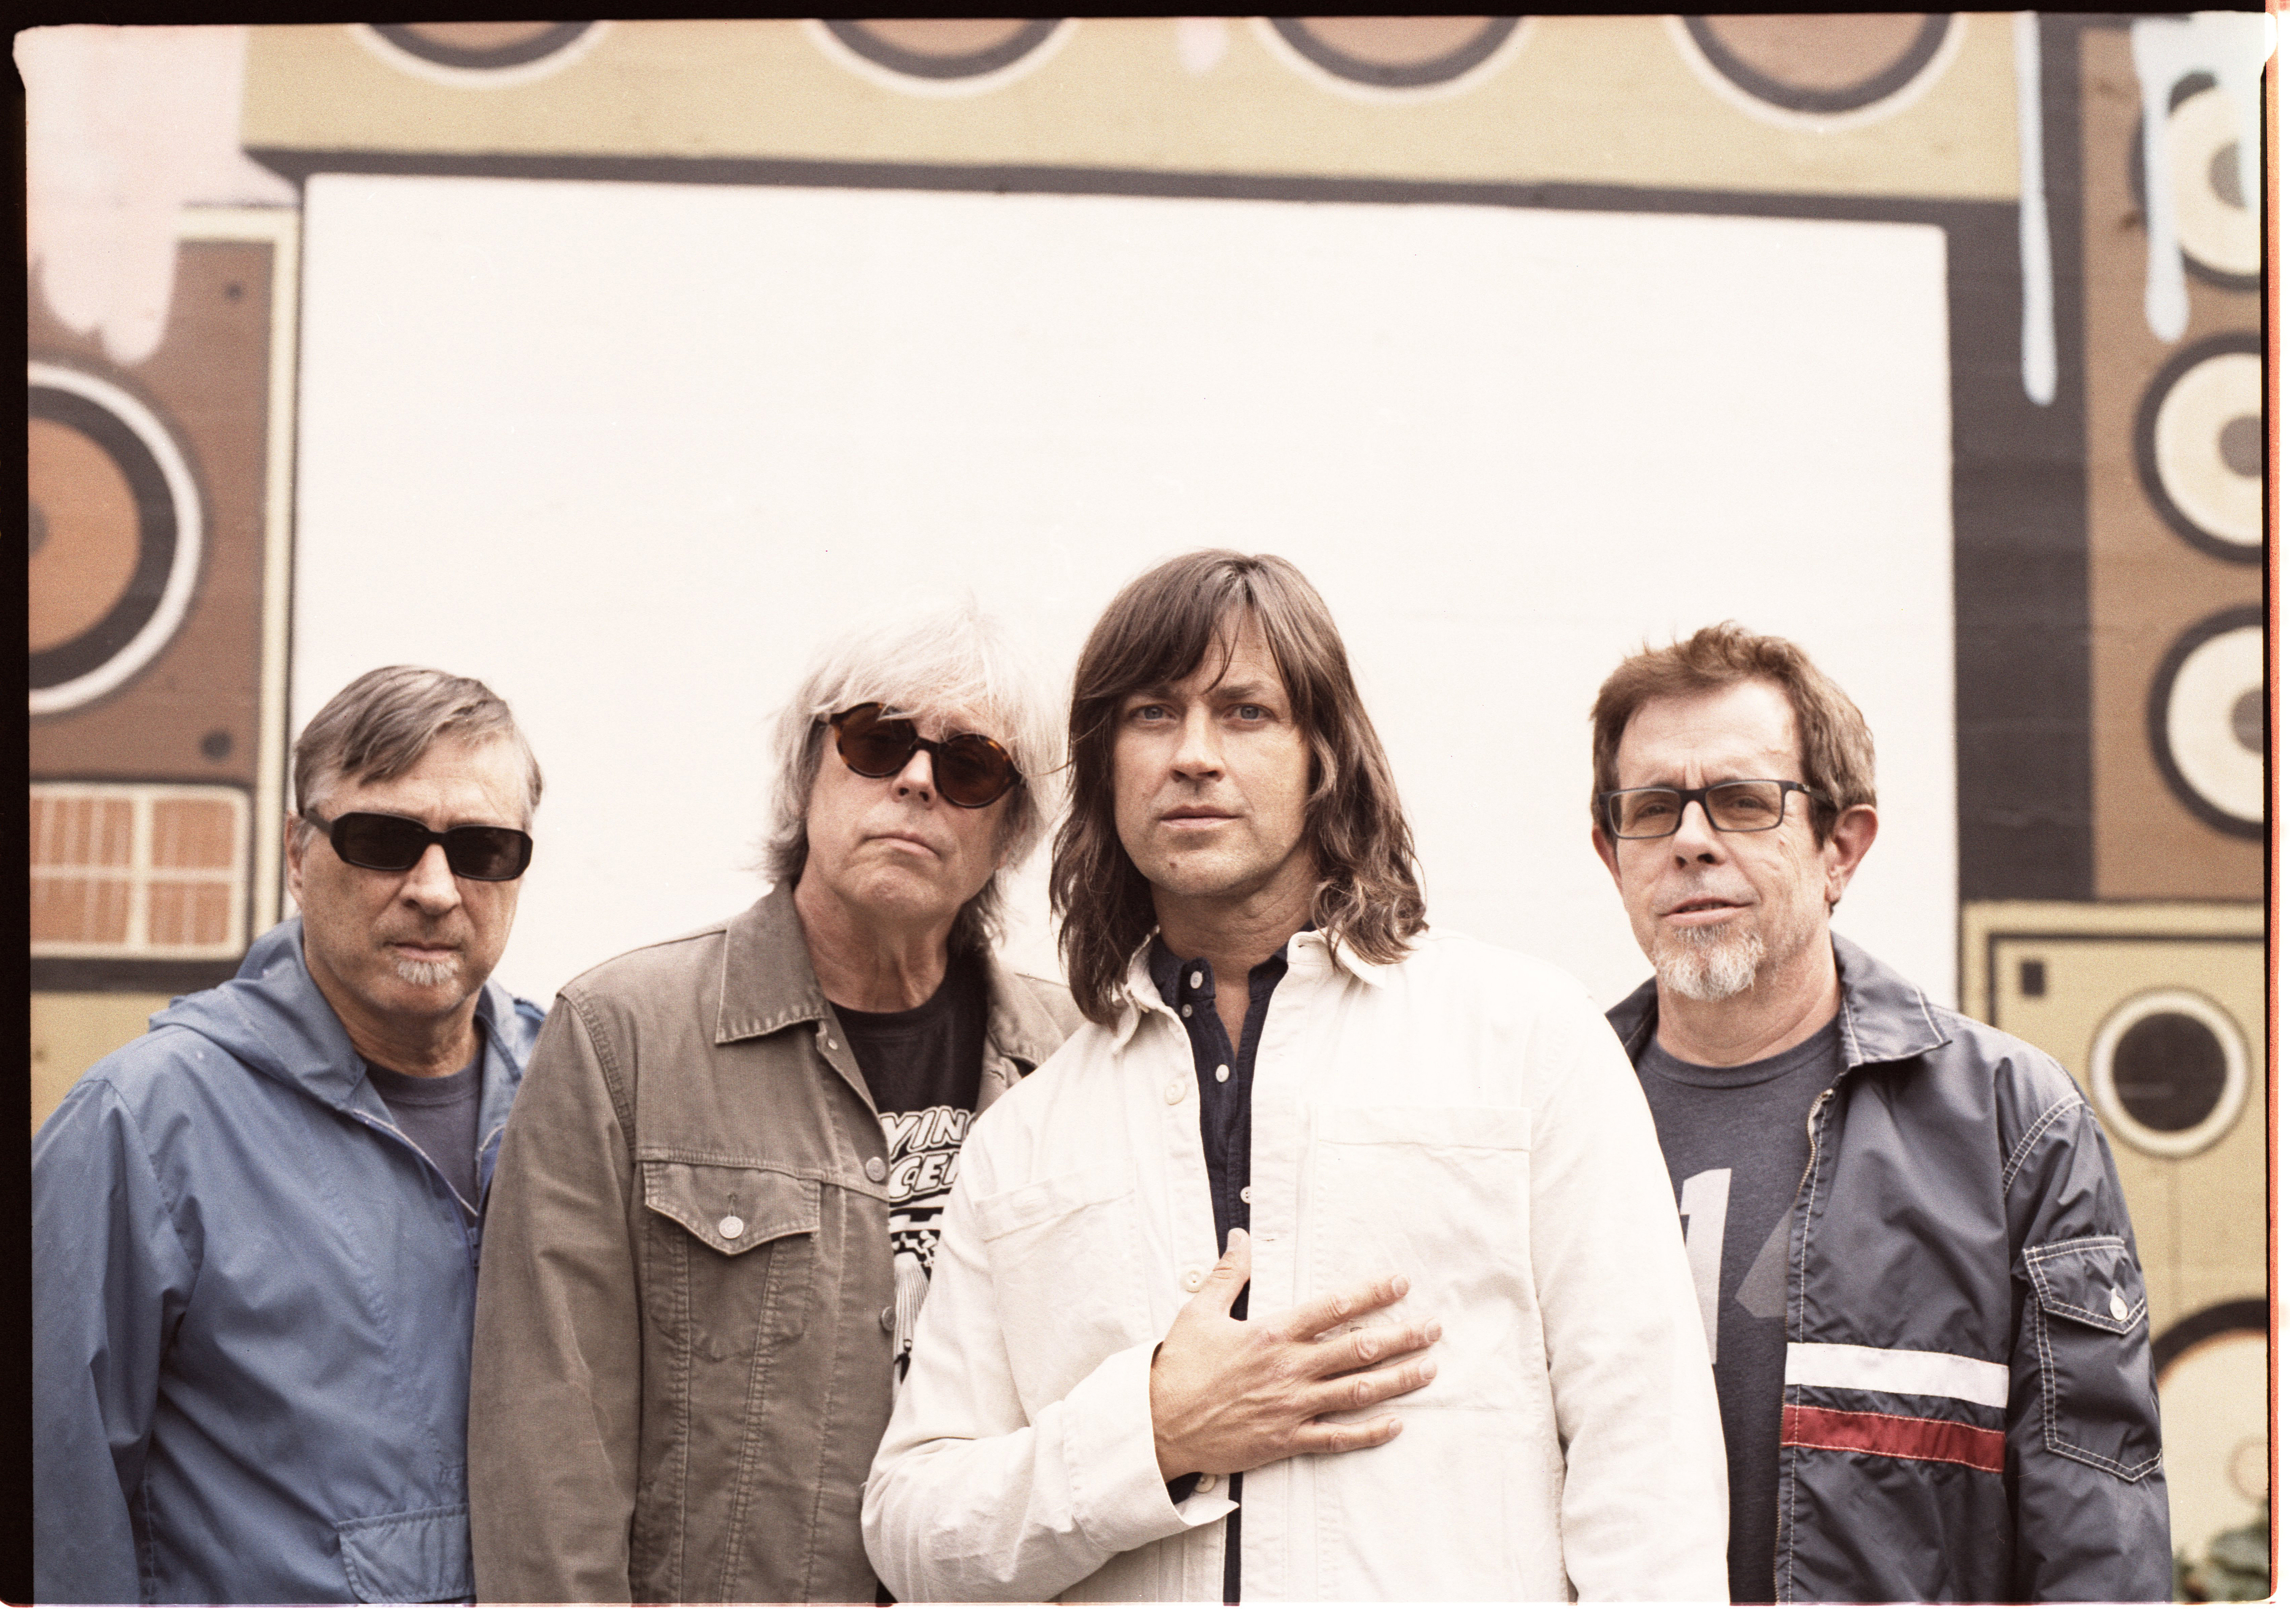 Standing in front of a painted wall, the Old 97s face the camera